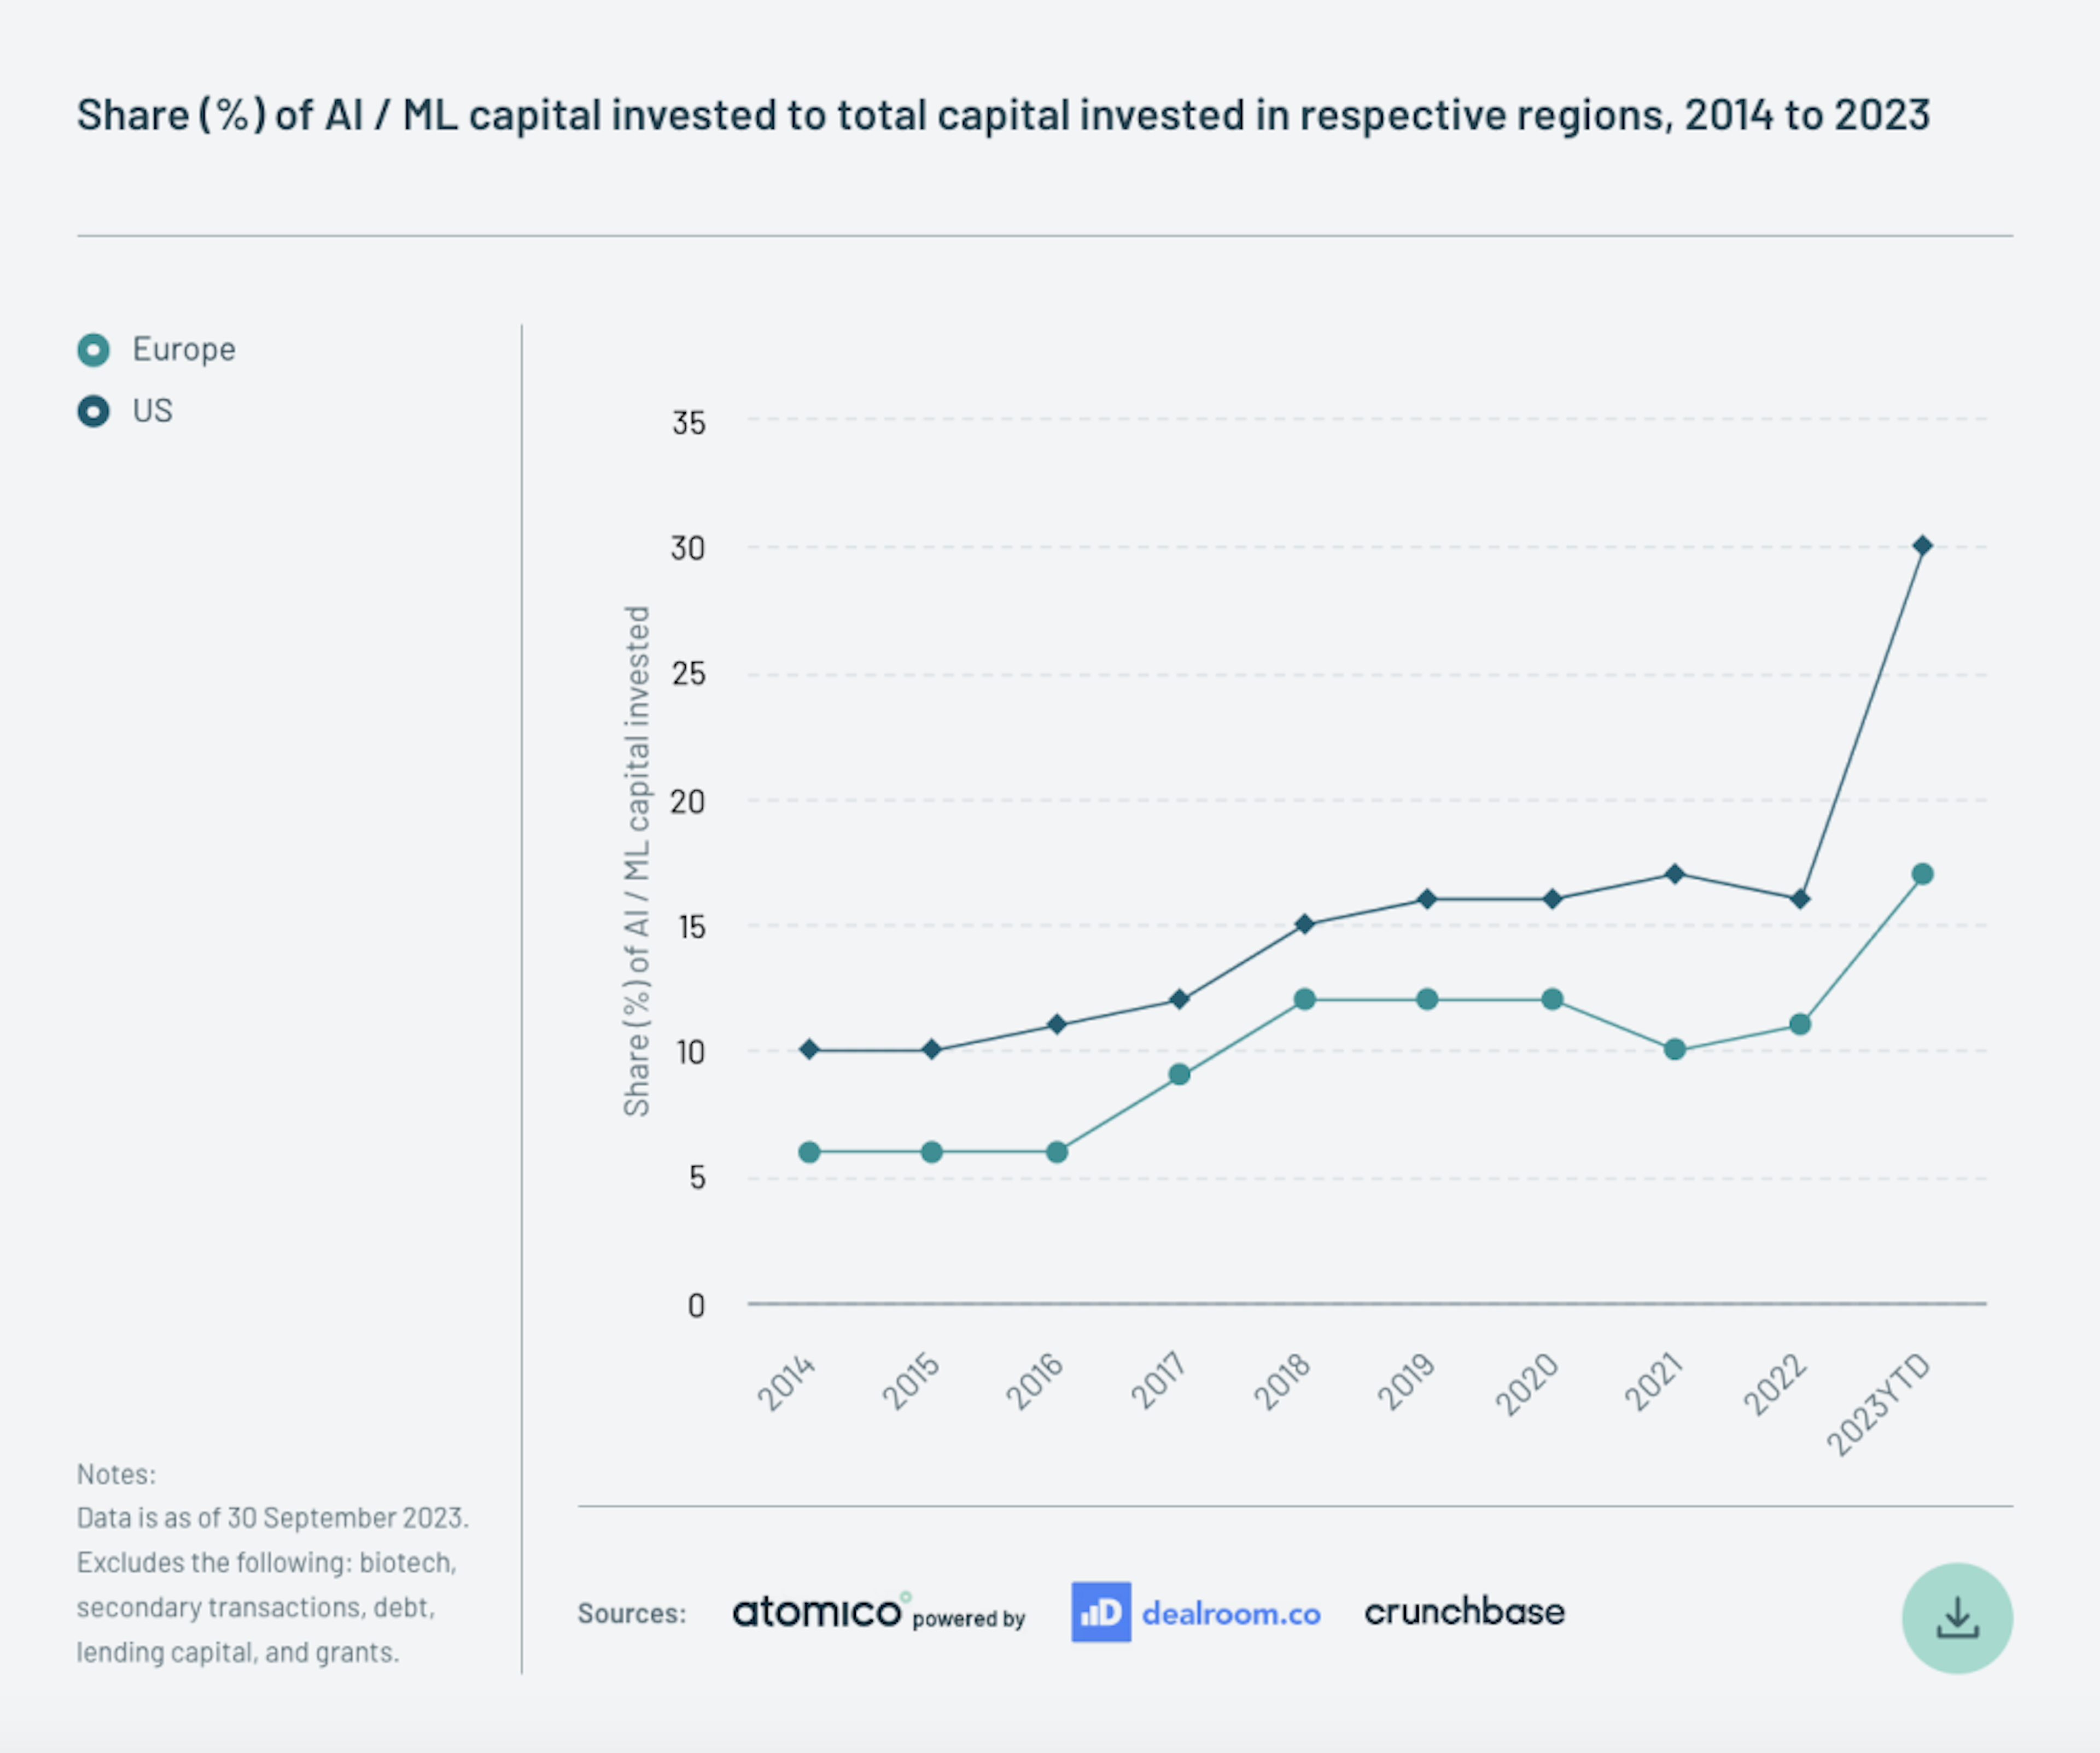 Line chart showing the percentage share of AI/ML capital invested to total capital invested in the Europe and the US, between 2014 and 2023, from Atomico's State of European Tech report.